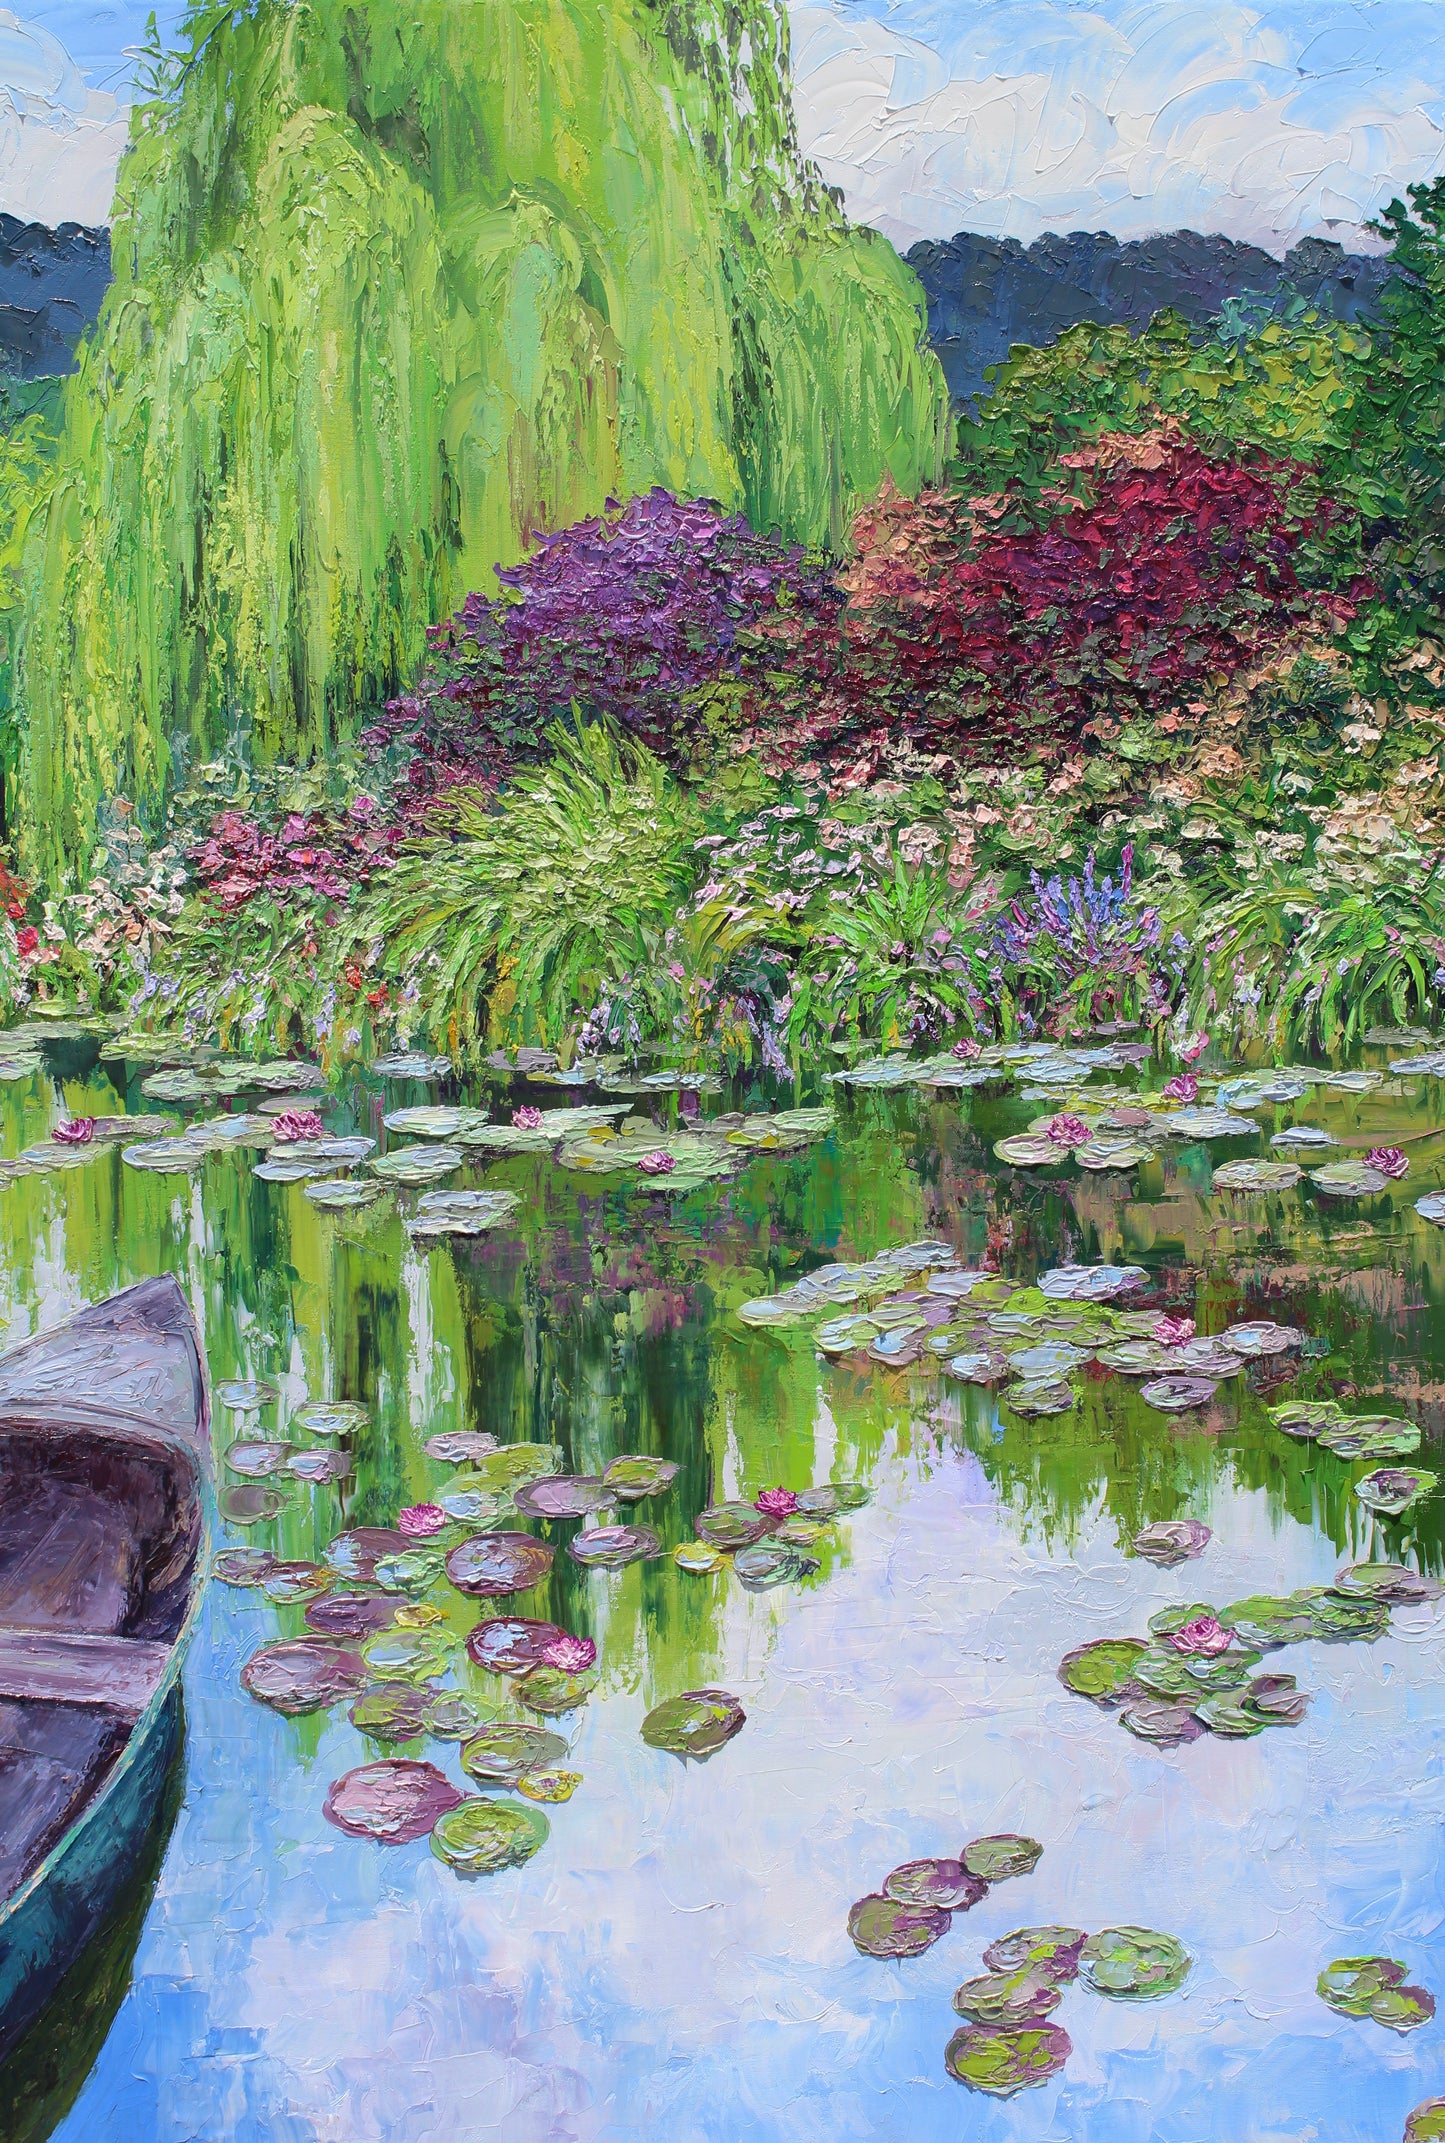 The Norwegian boat At Giverny